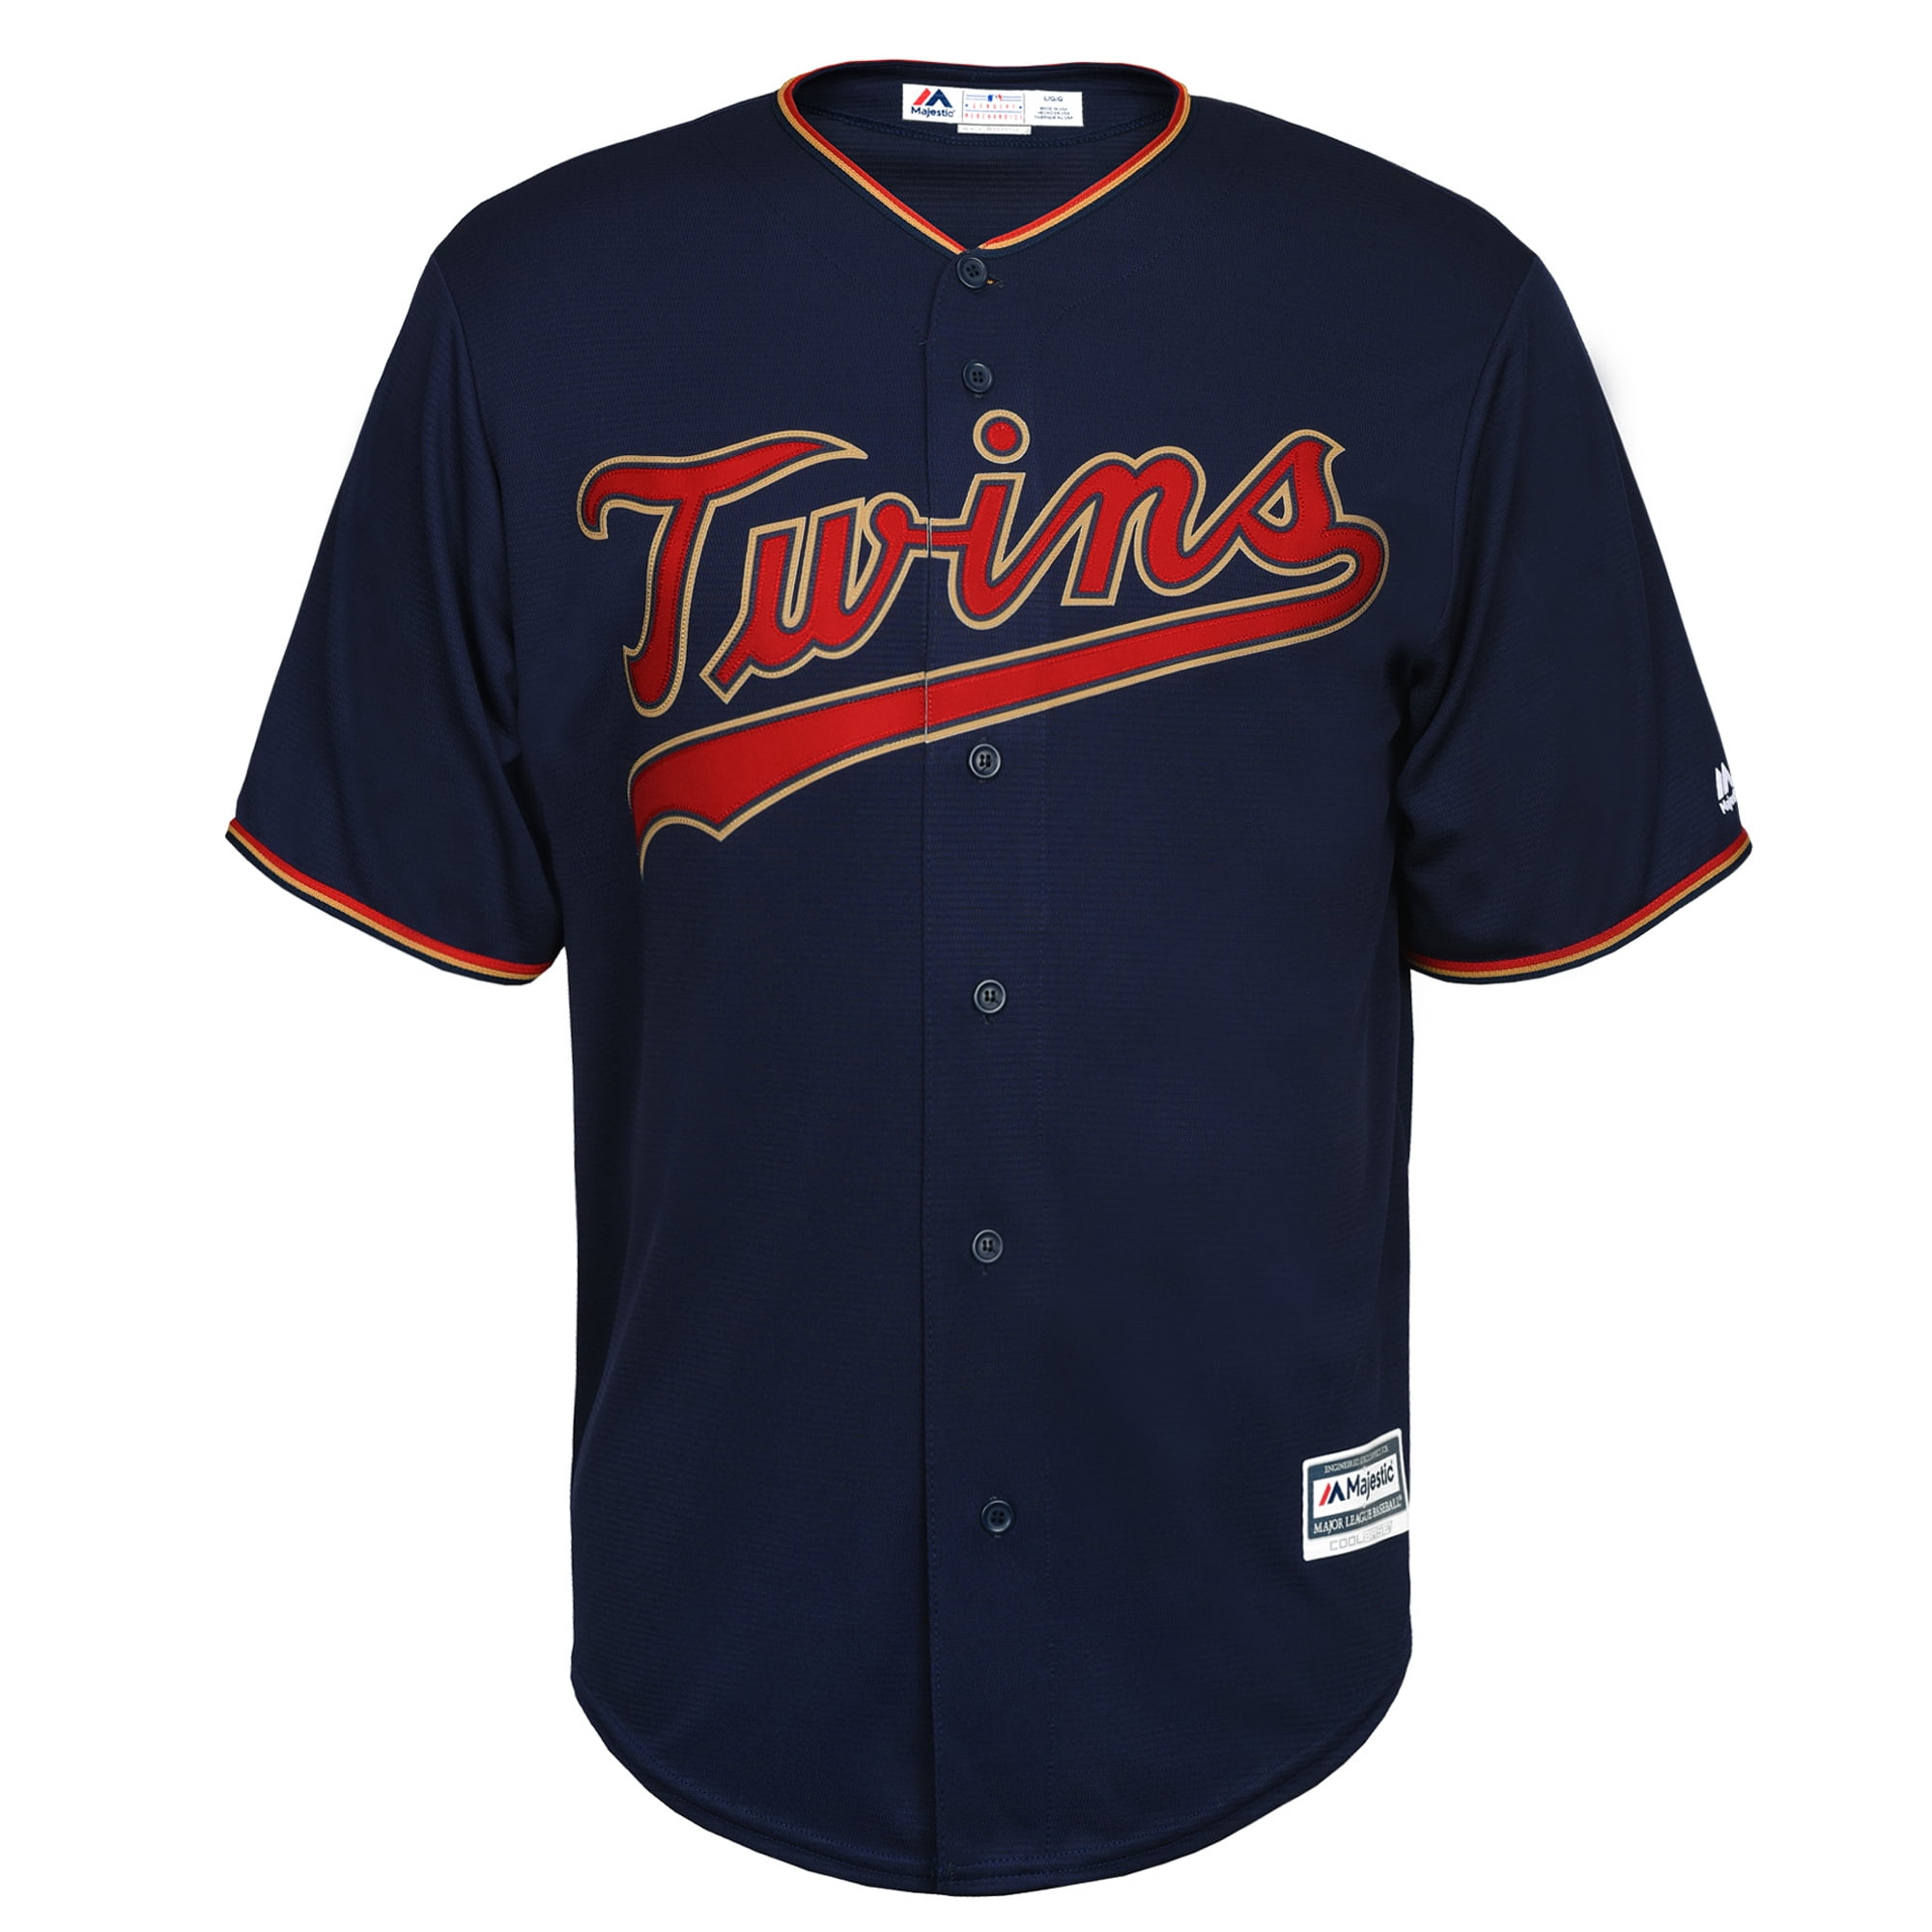 official twins jersey